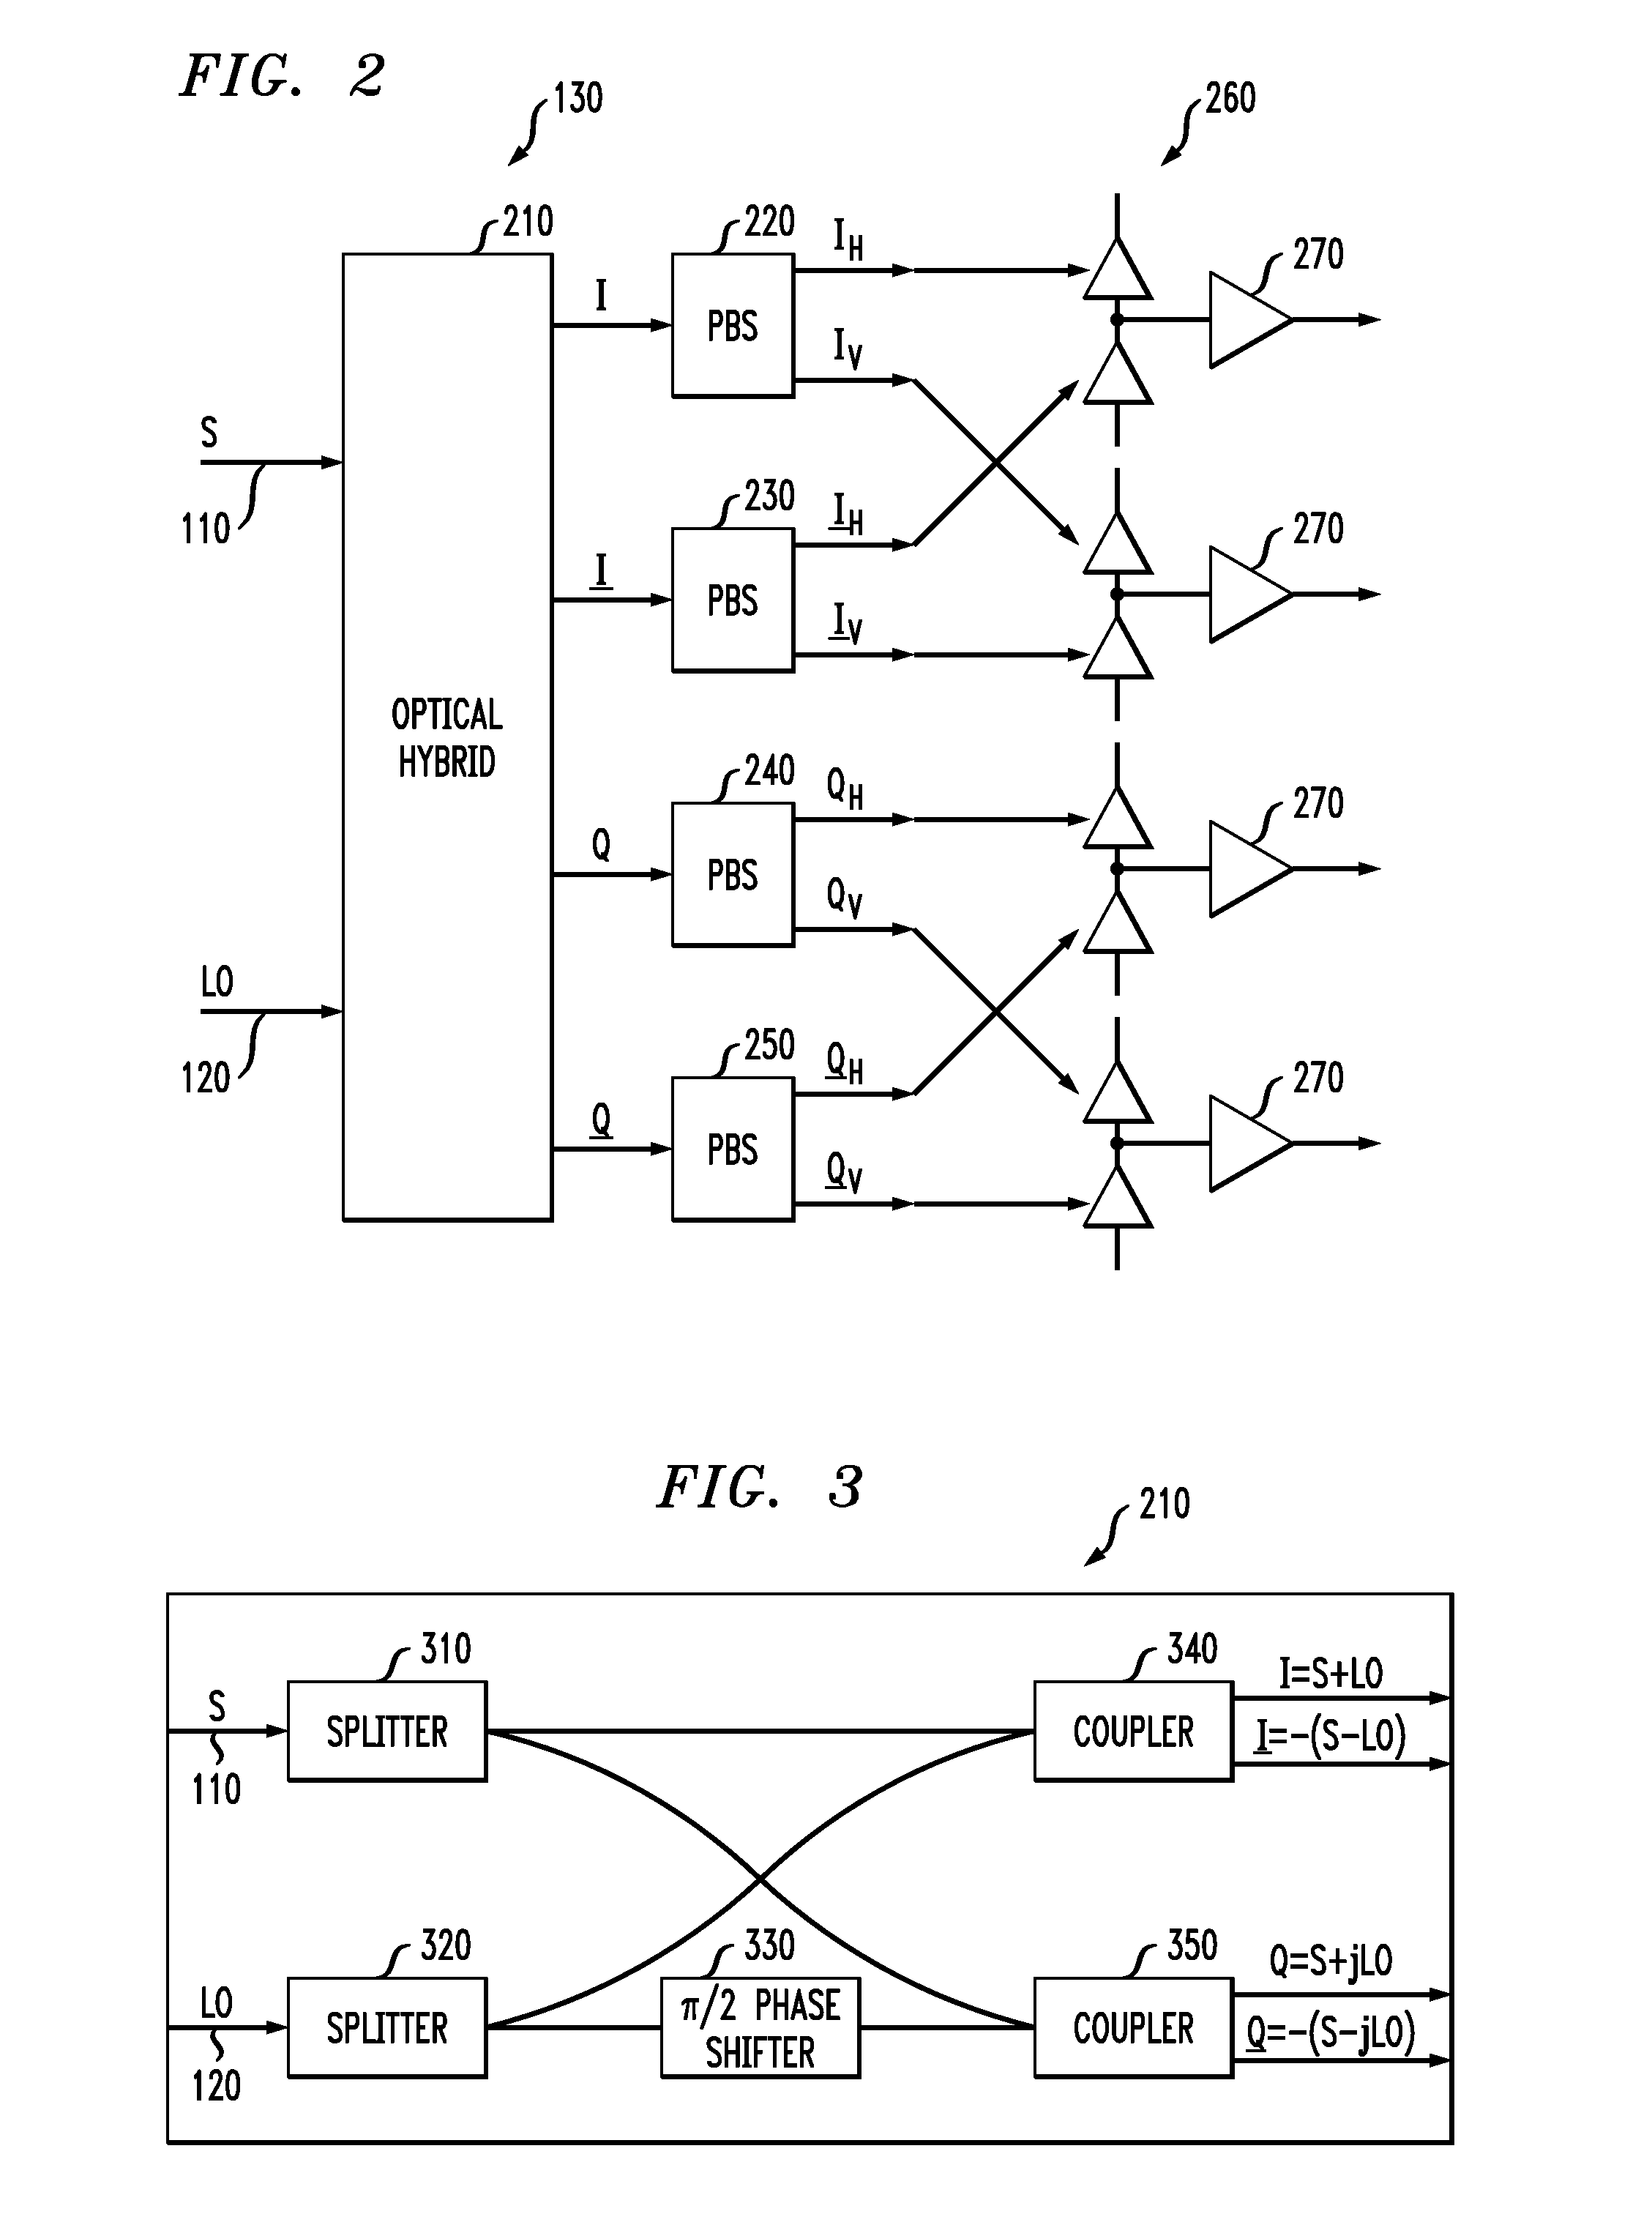 System and method for receiving coherent, polarizaztion-multiplexed optical signals